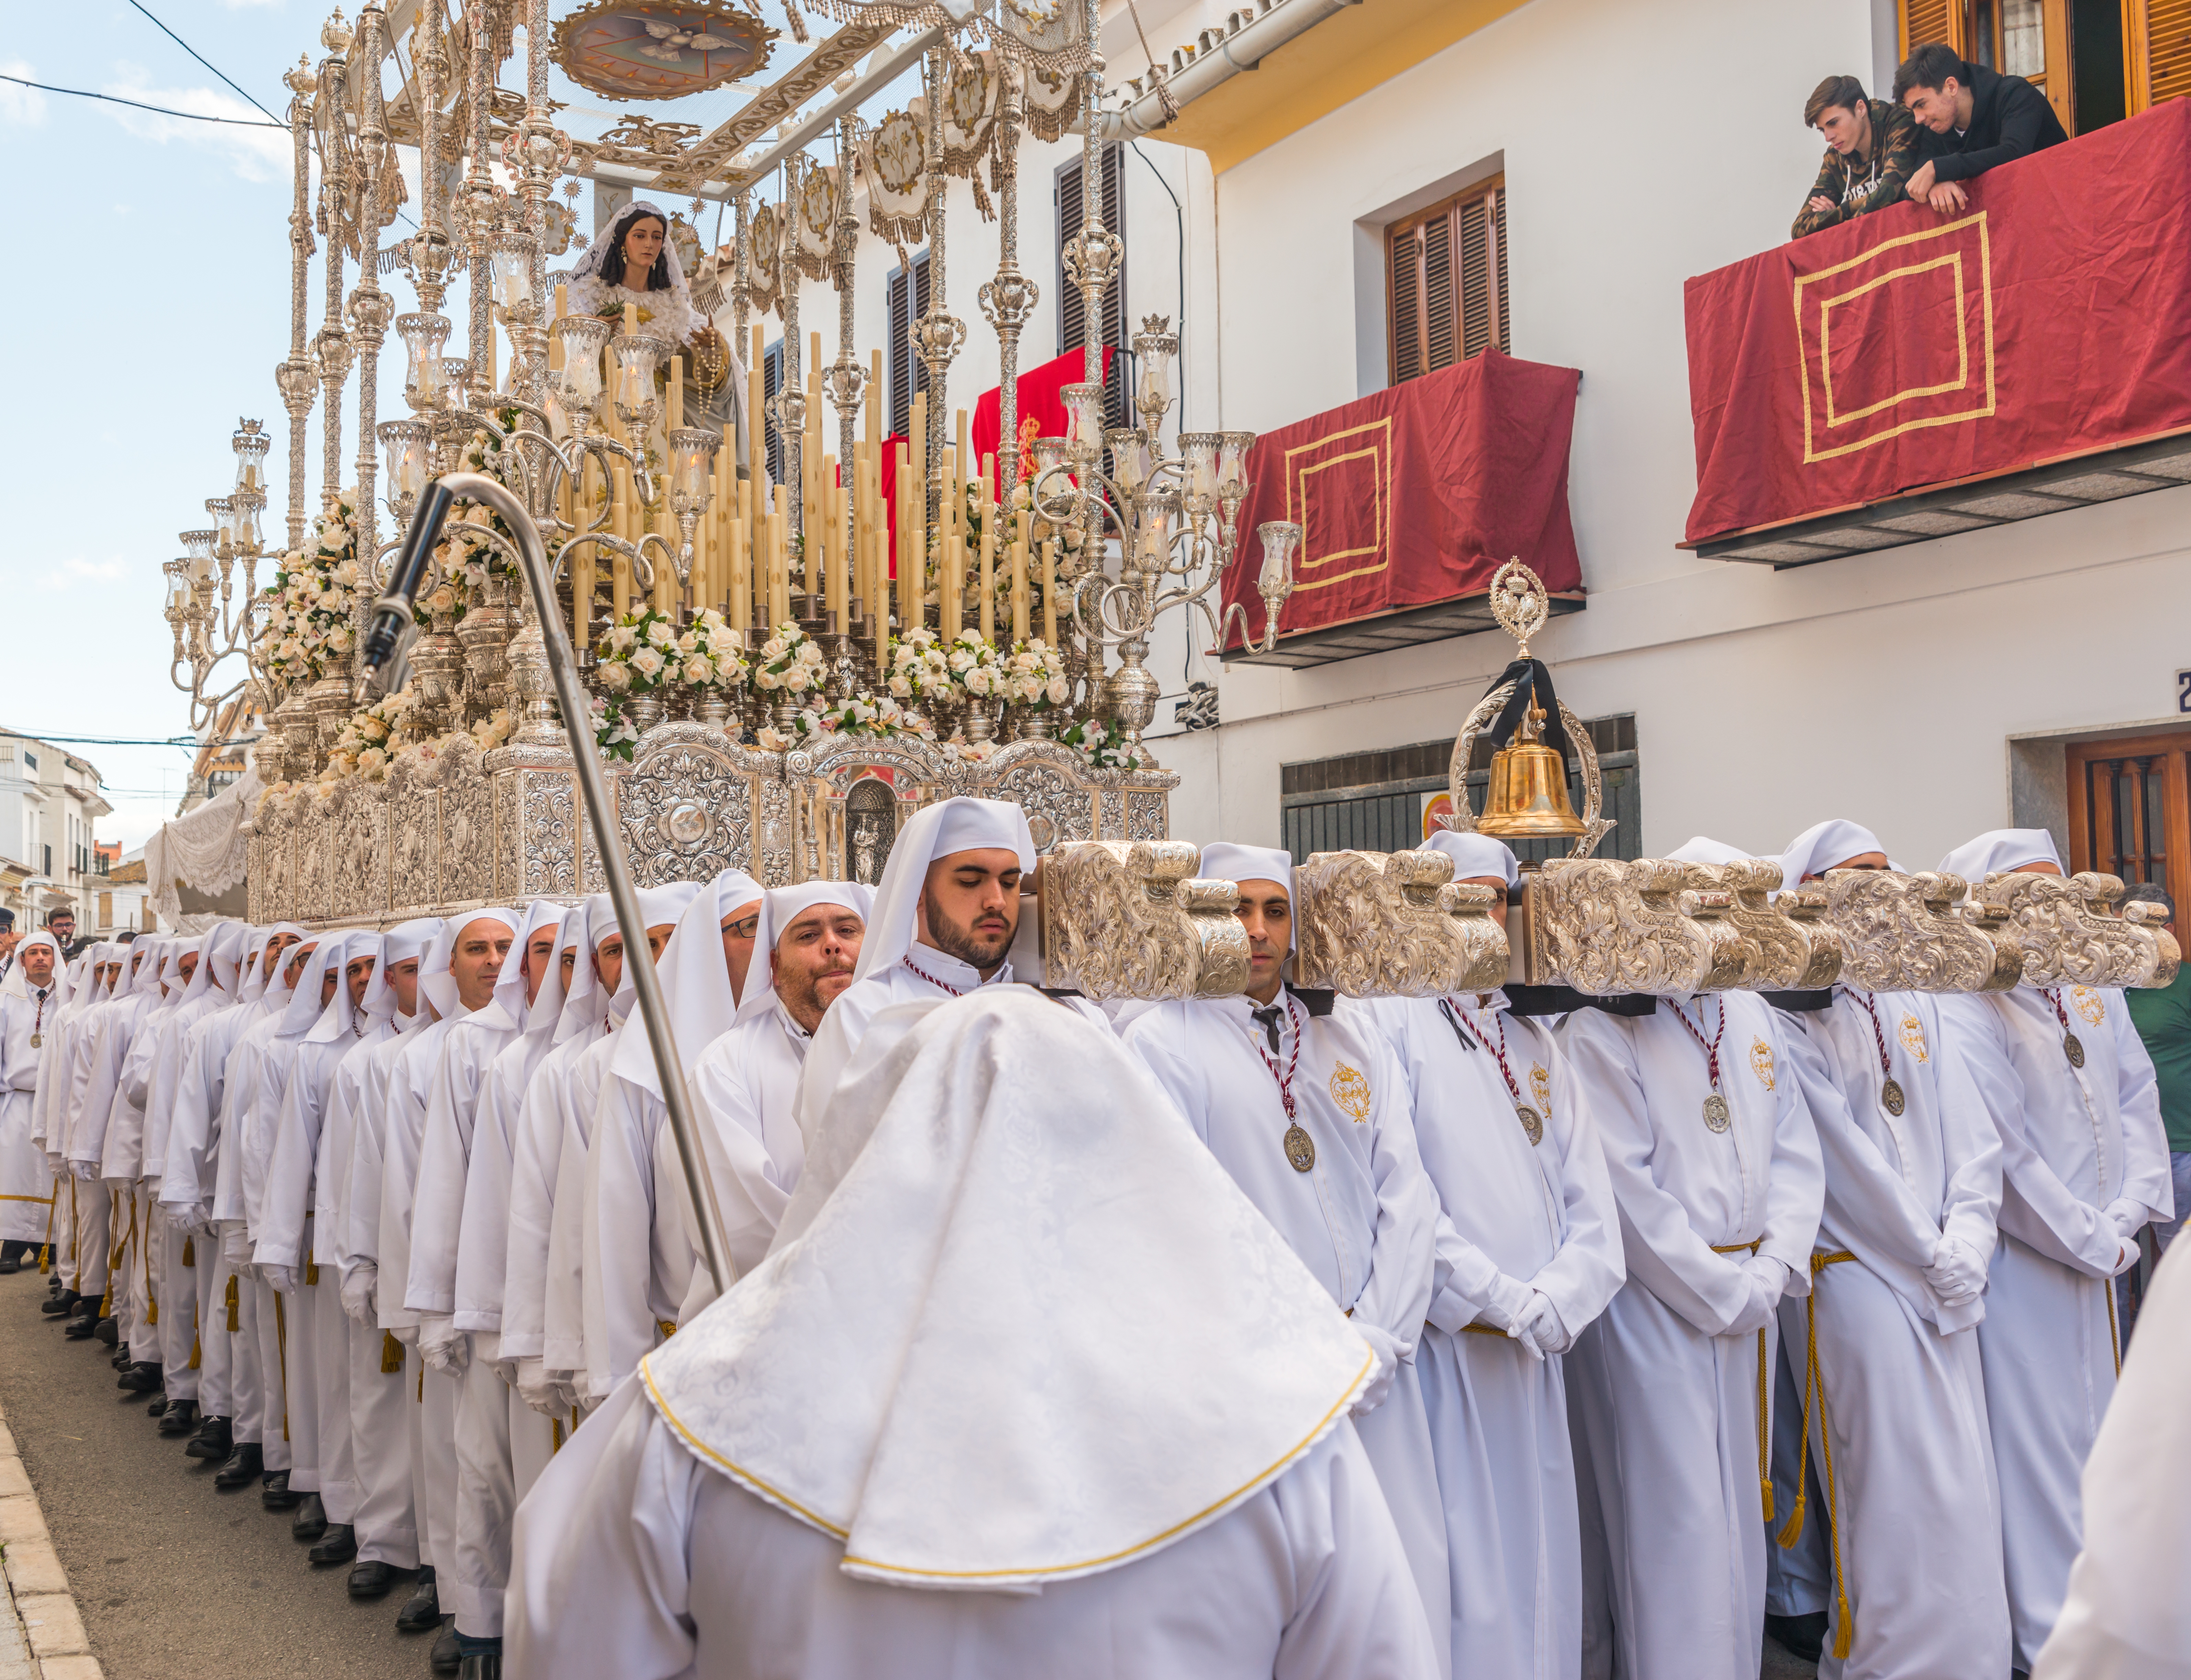 Procession of people in the holy week.